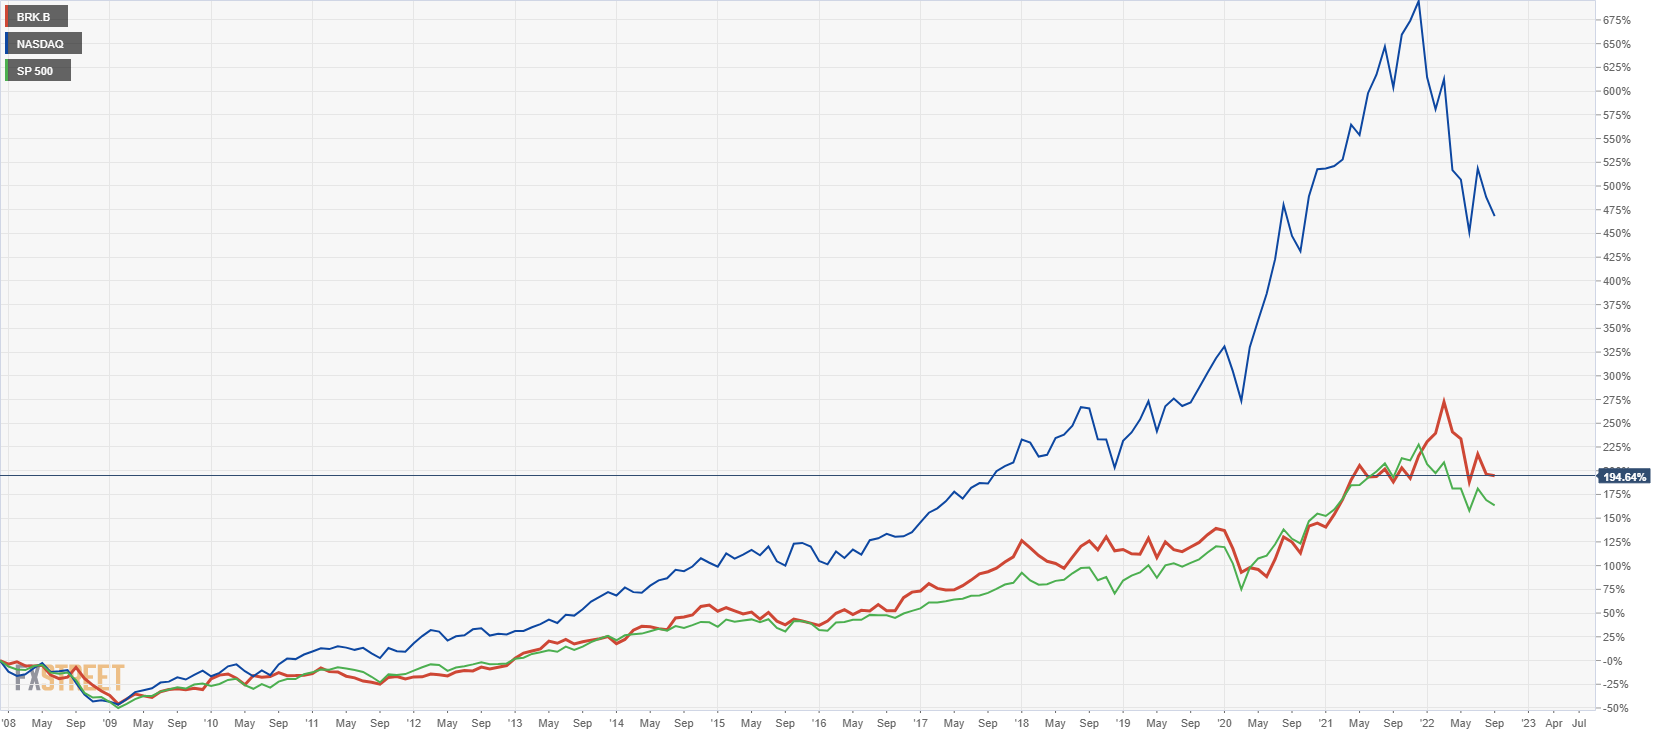 BRK.B performance vs NASDAQ and S&P 500 since Great Financial Crisis